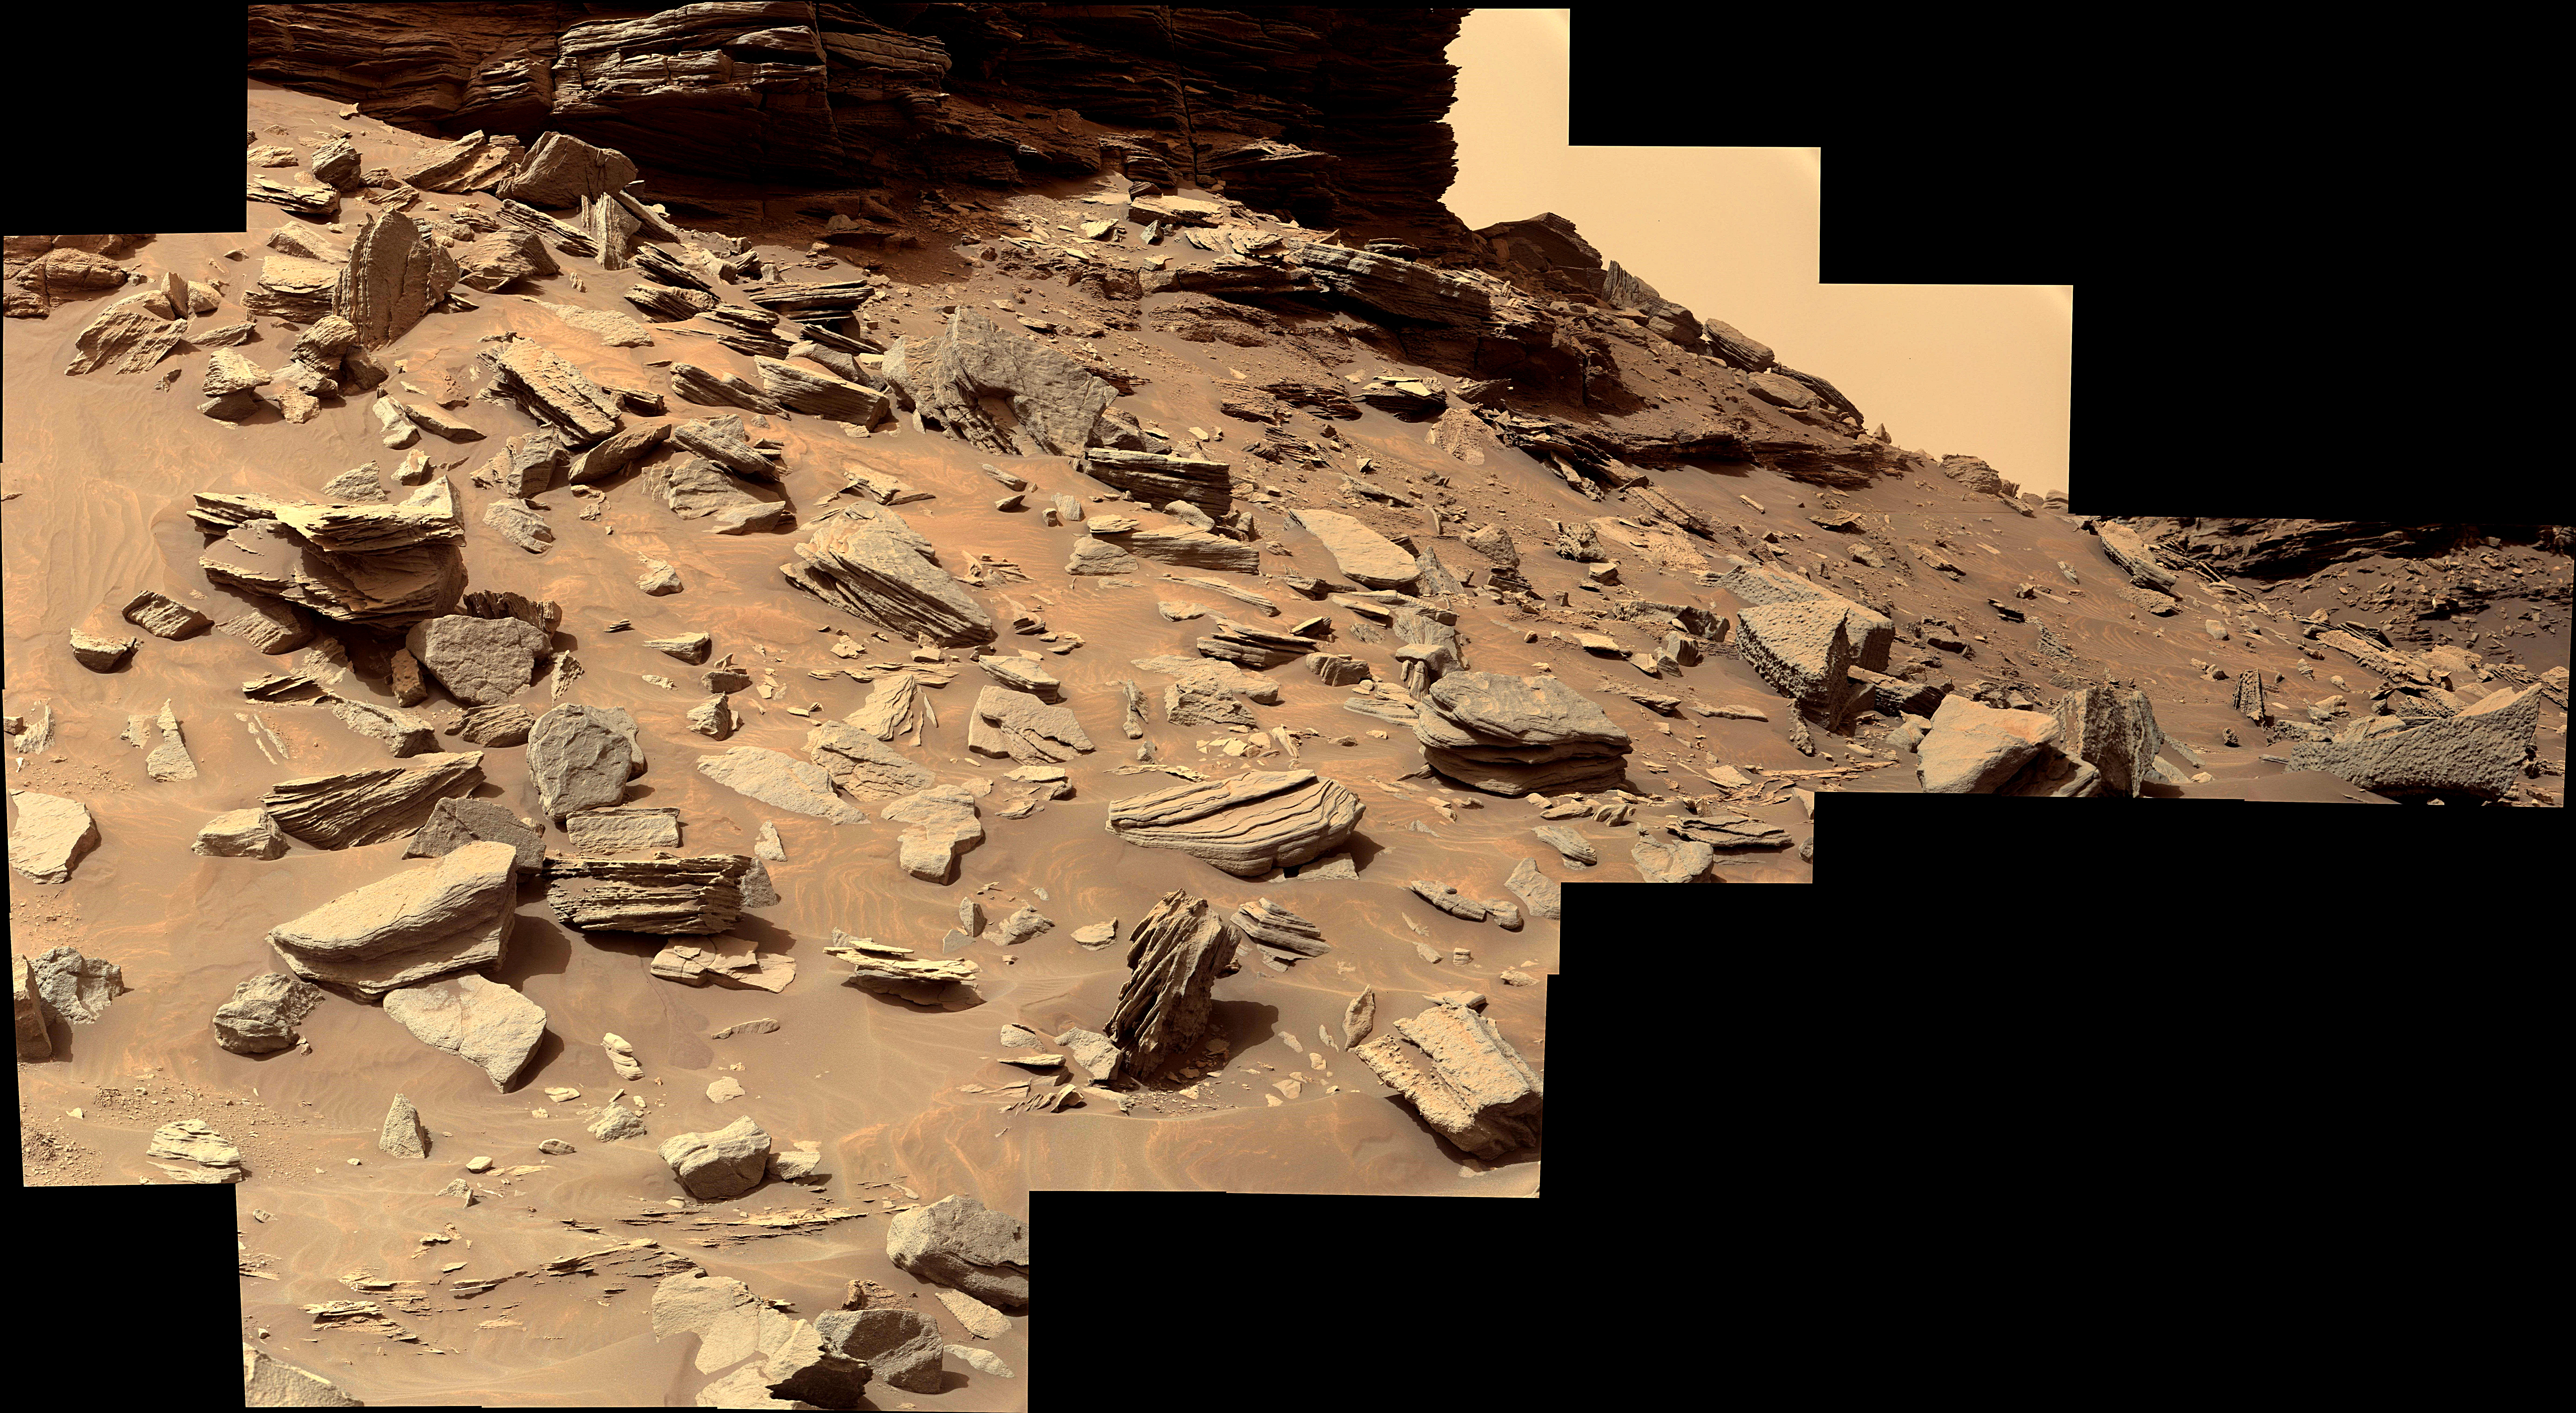 panoramic-curiosity-rover-view-1e-sol-1467-was-life-on-mars